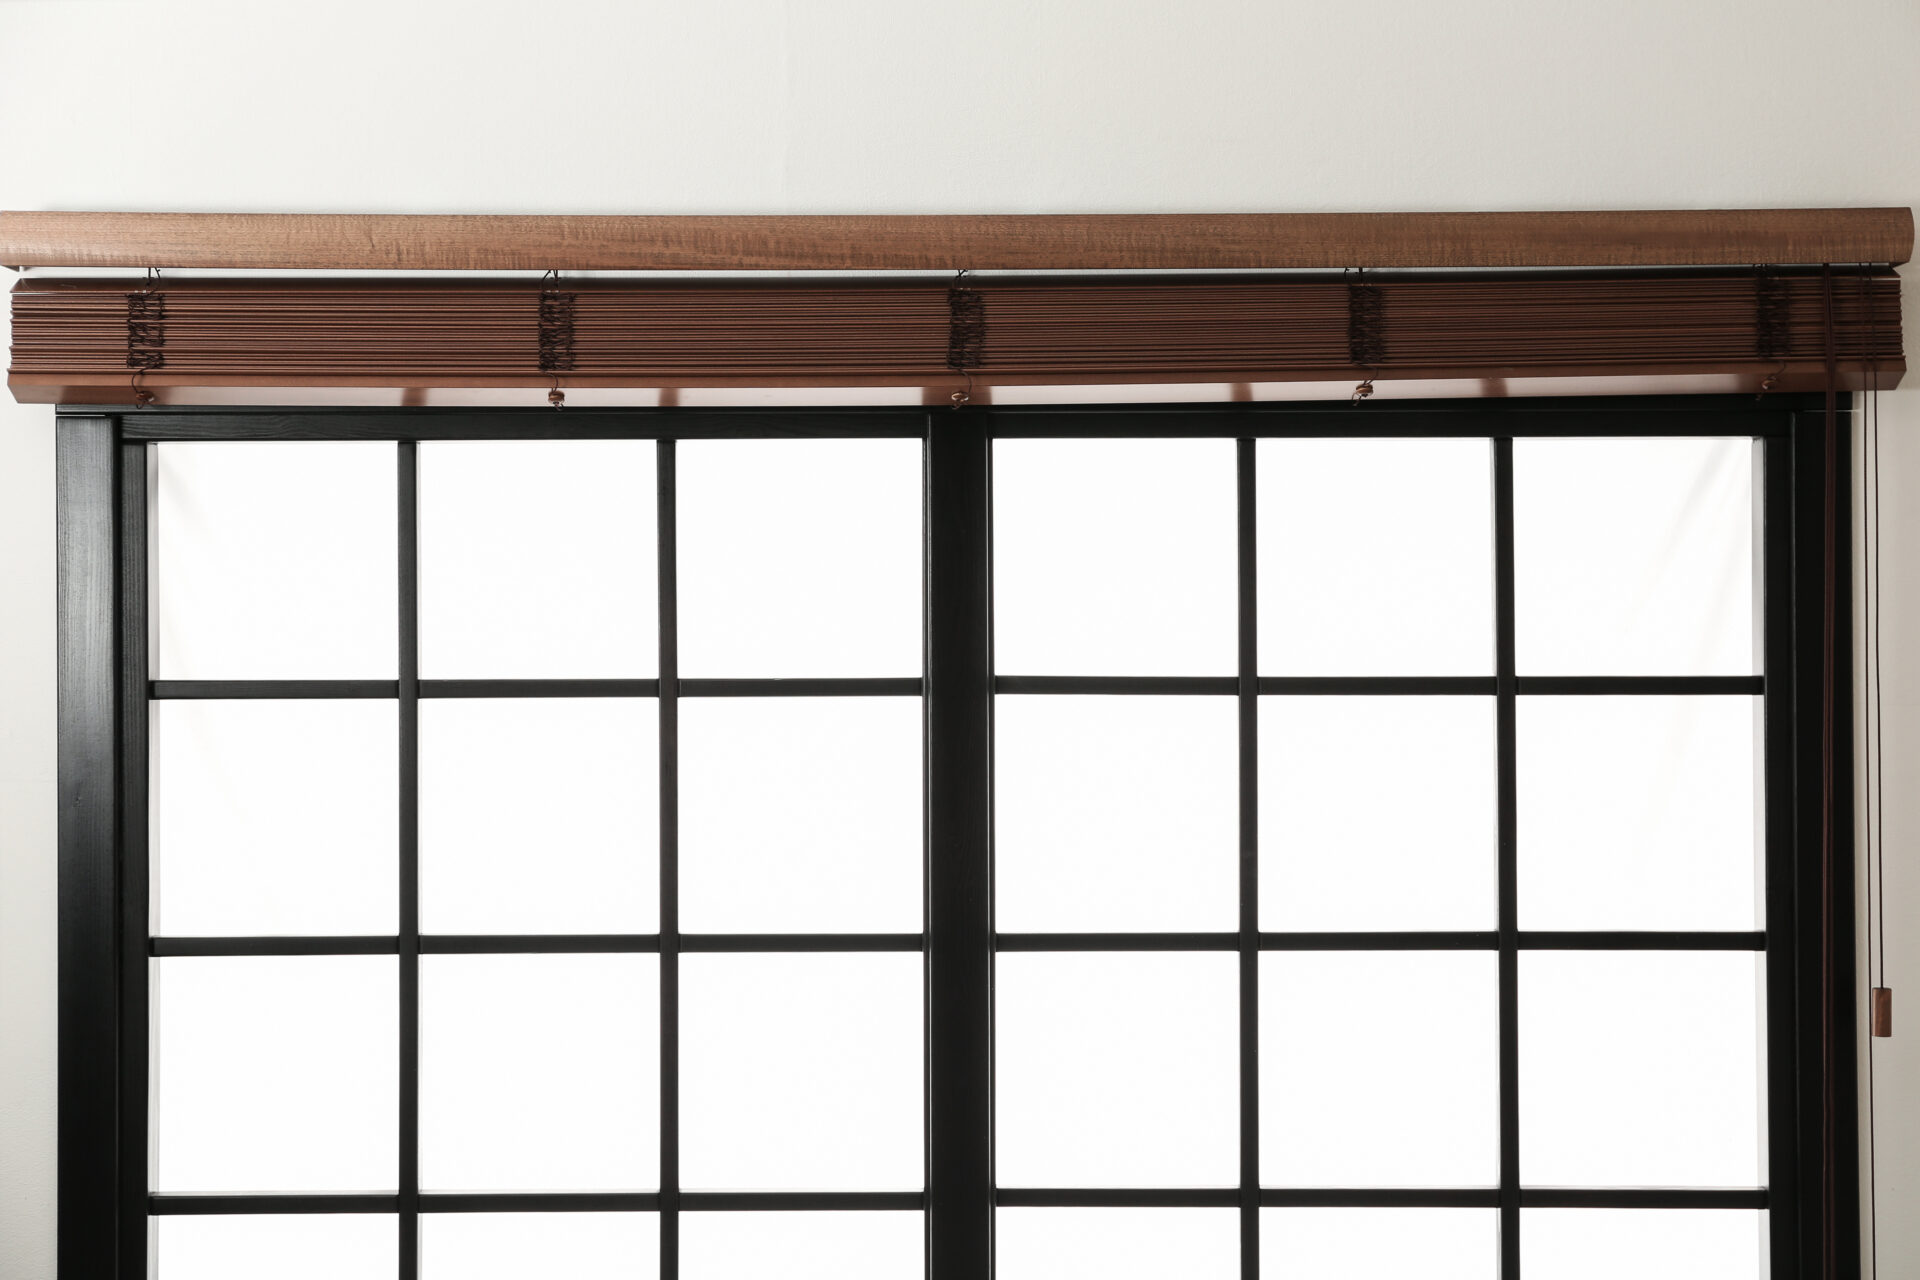 Modern window blinds with stylish faux wood blinds on door. Wholesale Blind Factory.